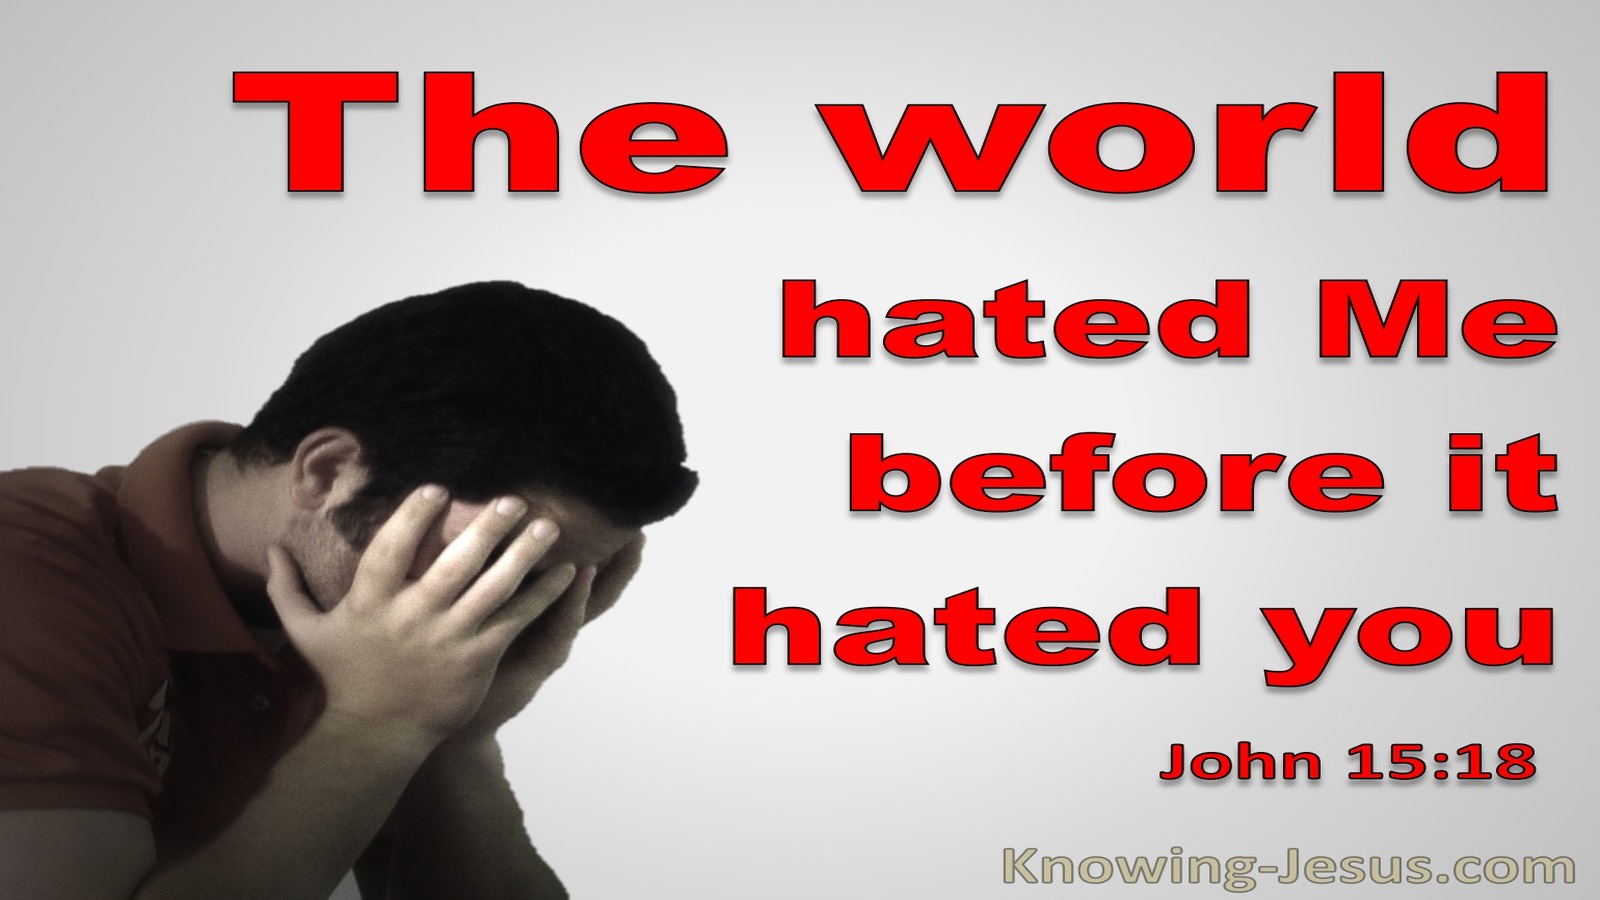 John 15:18 If The World Hates You It Hated Me First (red)